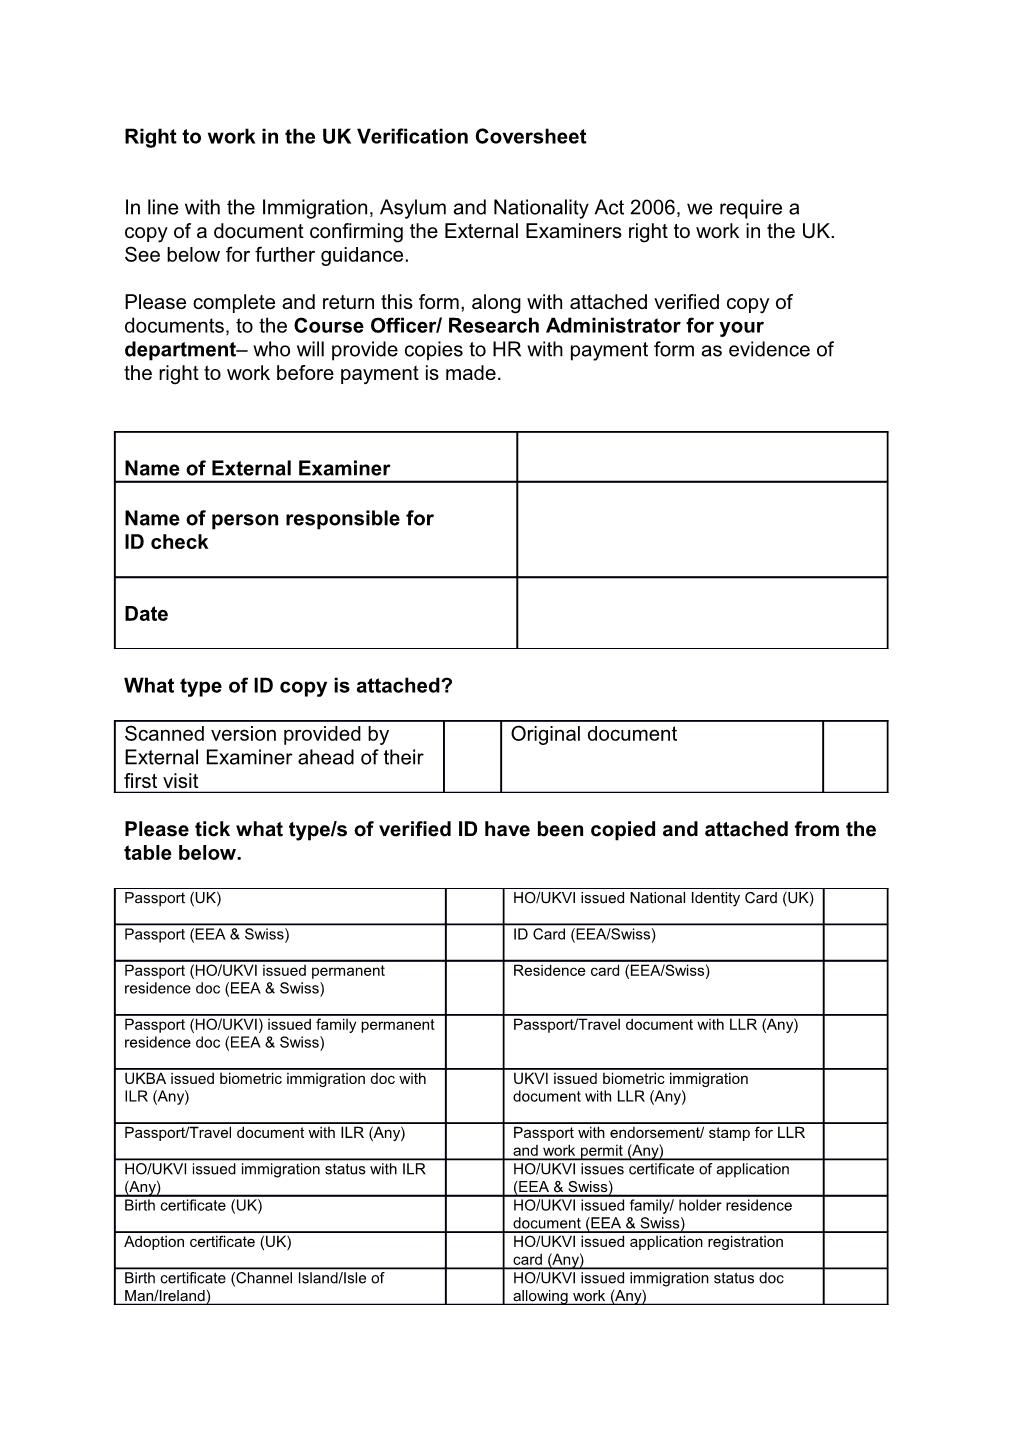 Right to Work in the UK Verification Coversheet